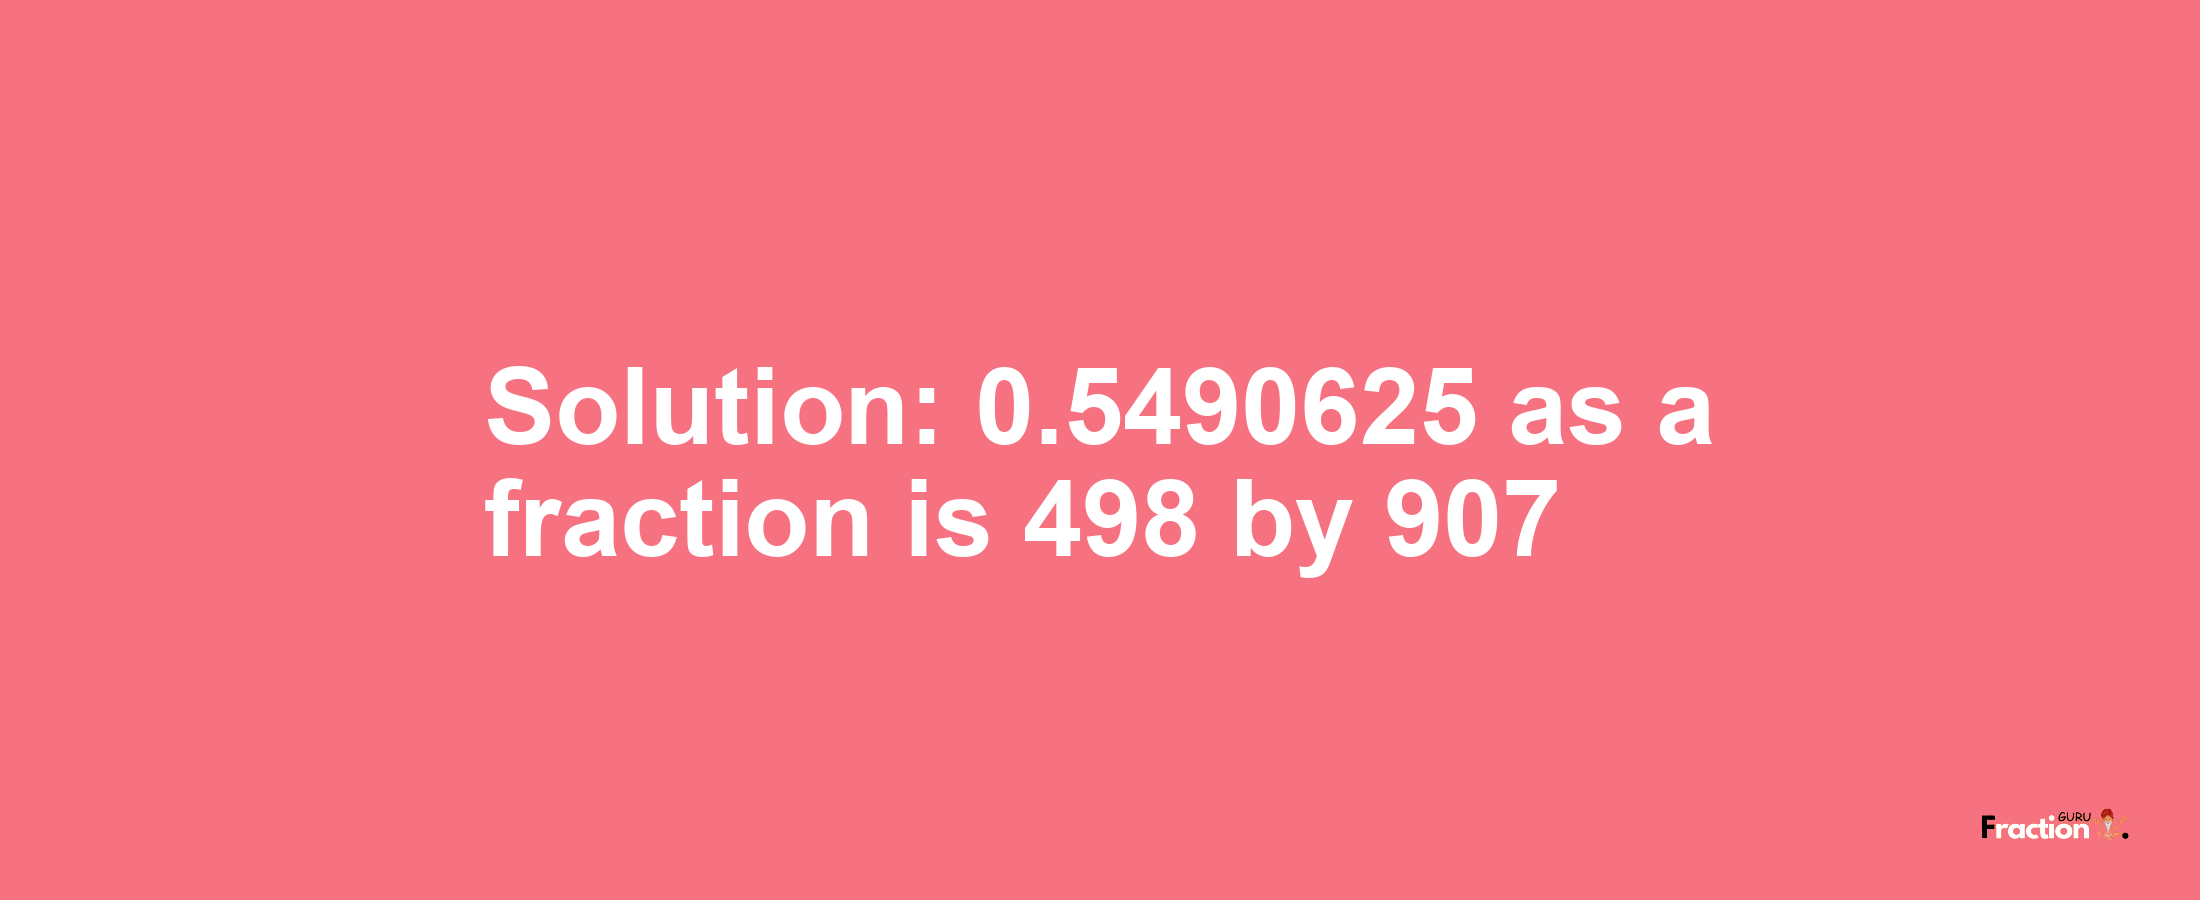 Solution:0.5490625 as a fraction is 498/907